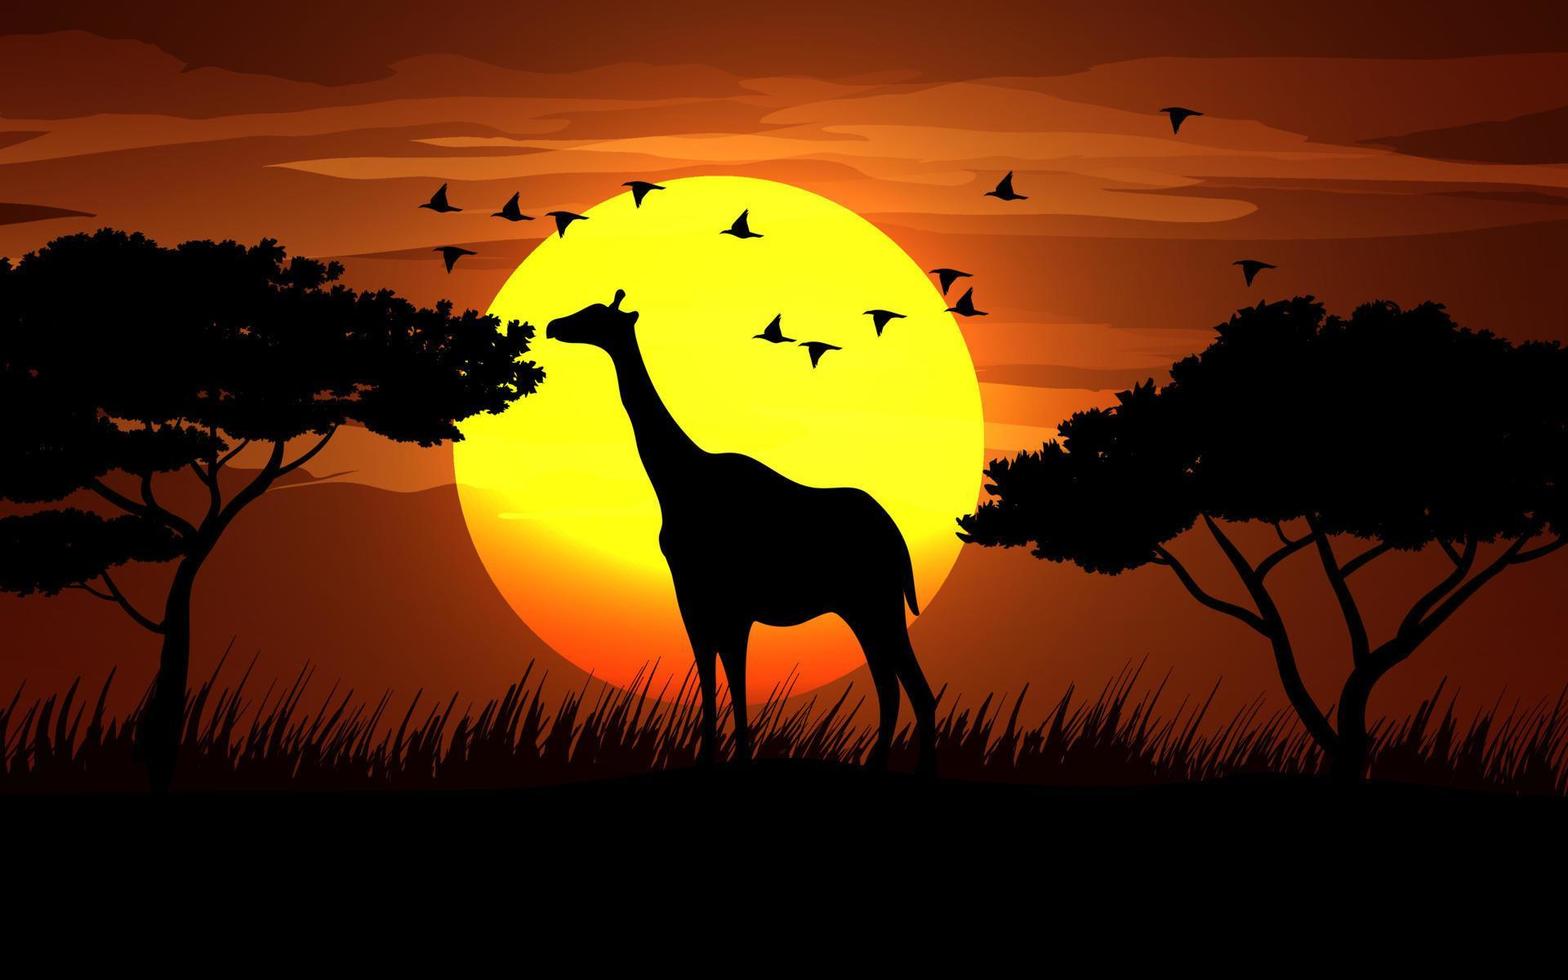 African wildlife on sunset with giraffe and birds silhouette vector